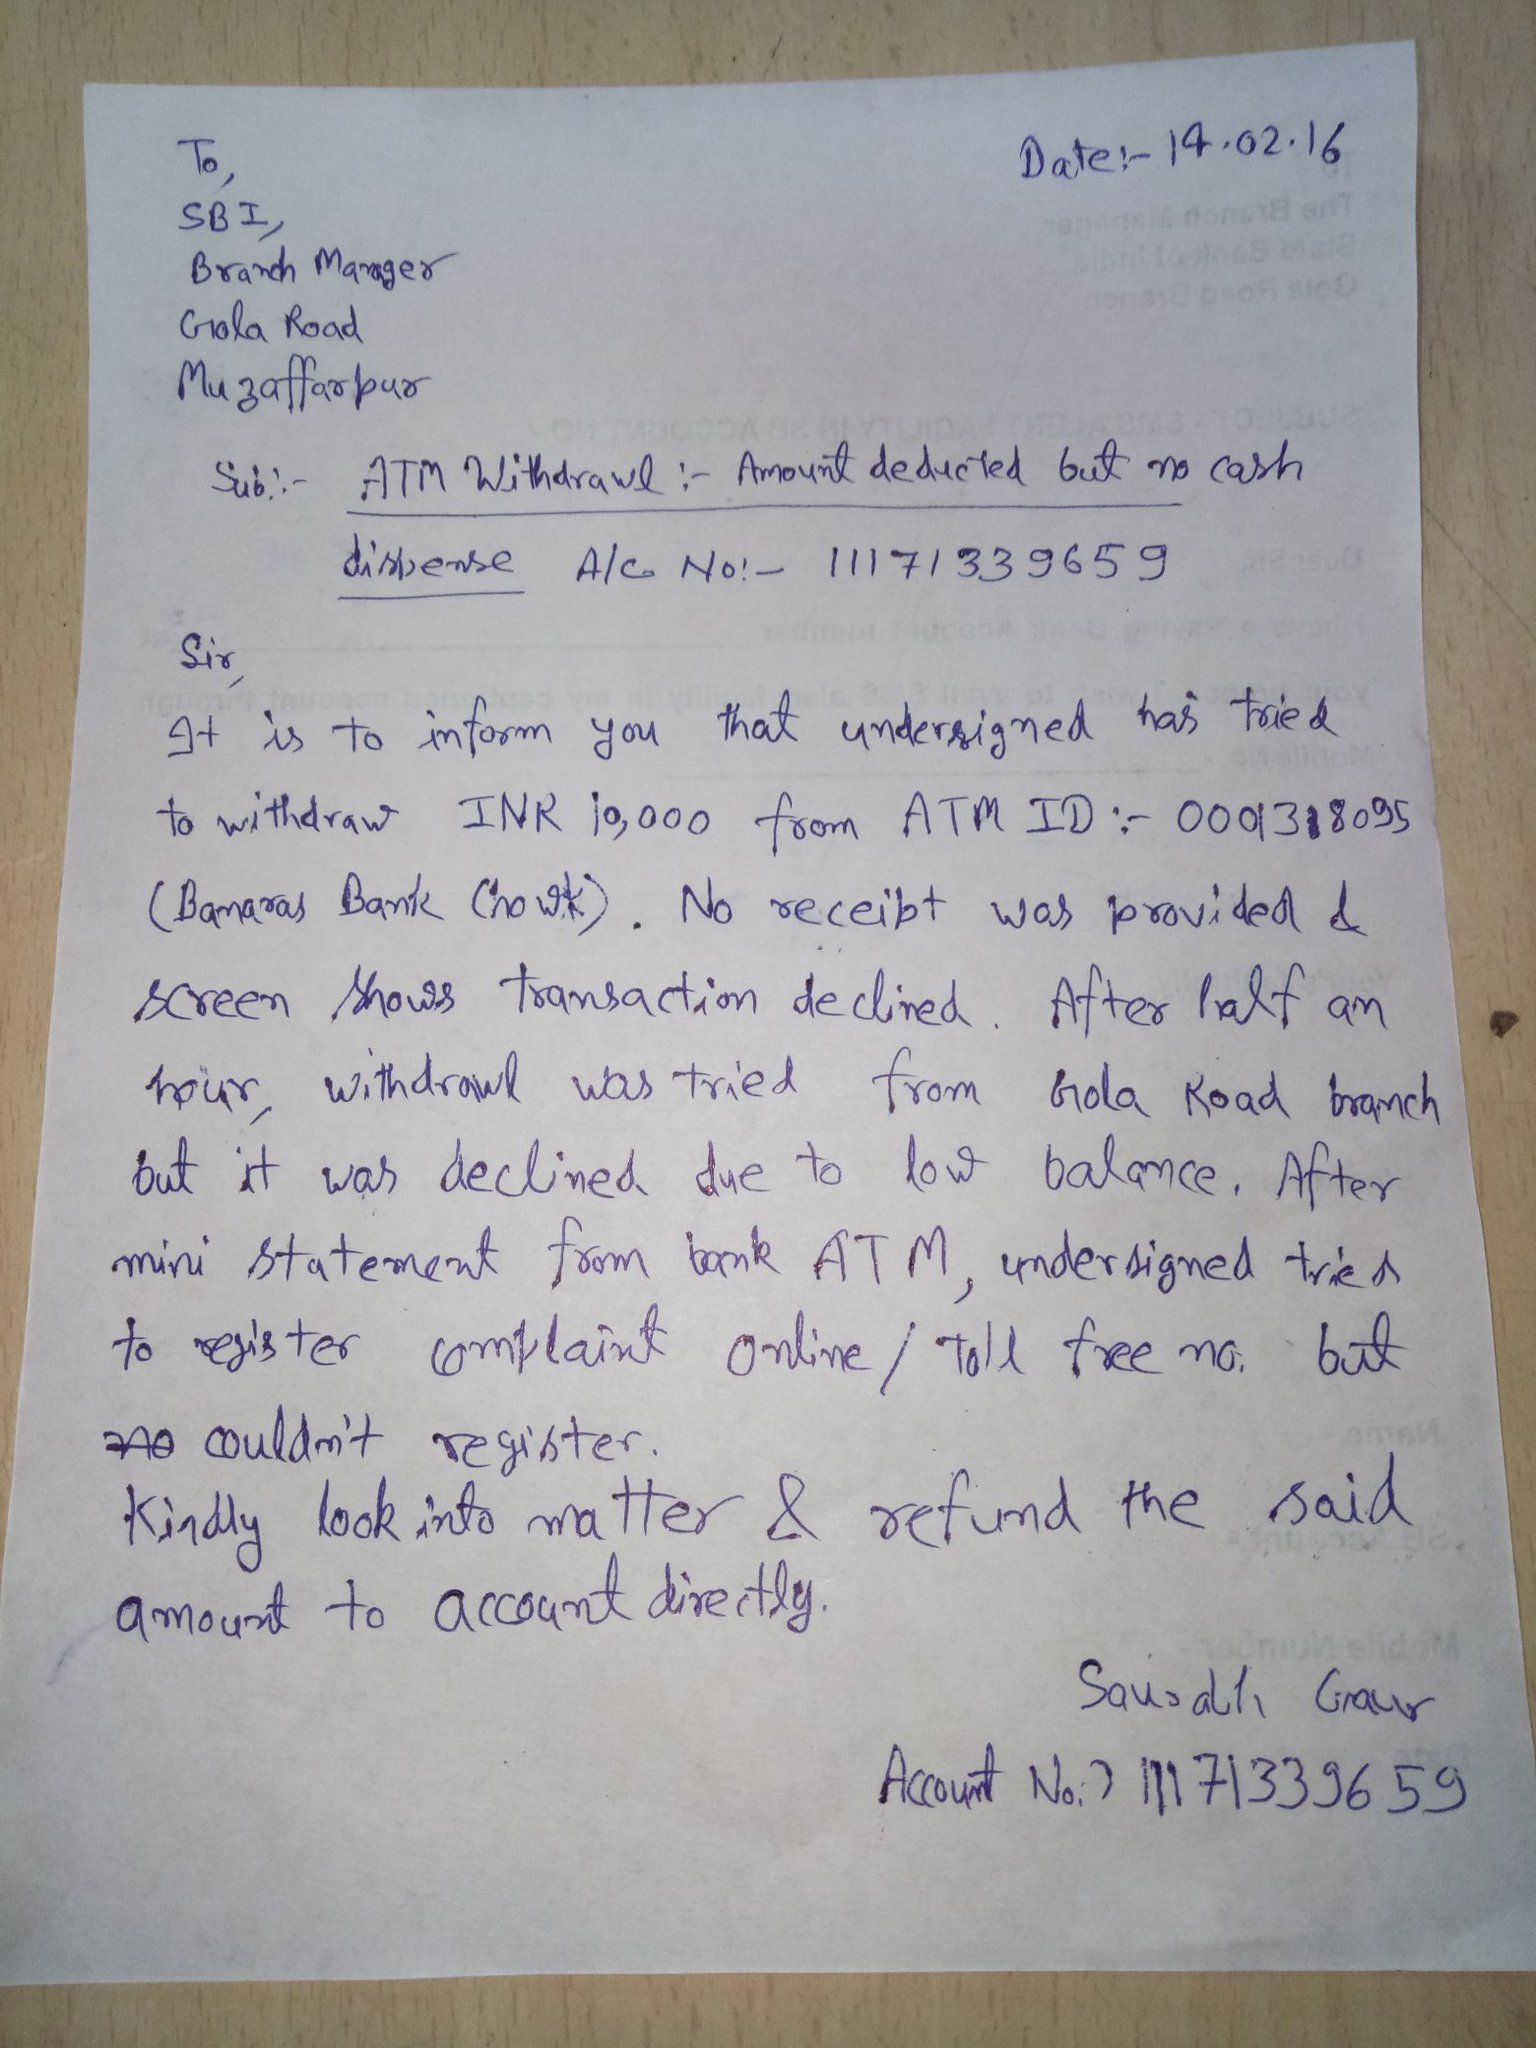 toshika-chand-on-twitter-theofficialsbi-lodged-a-complaint-vide